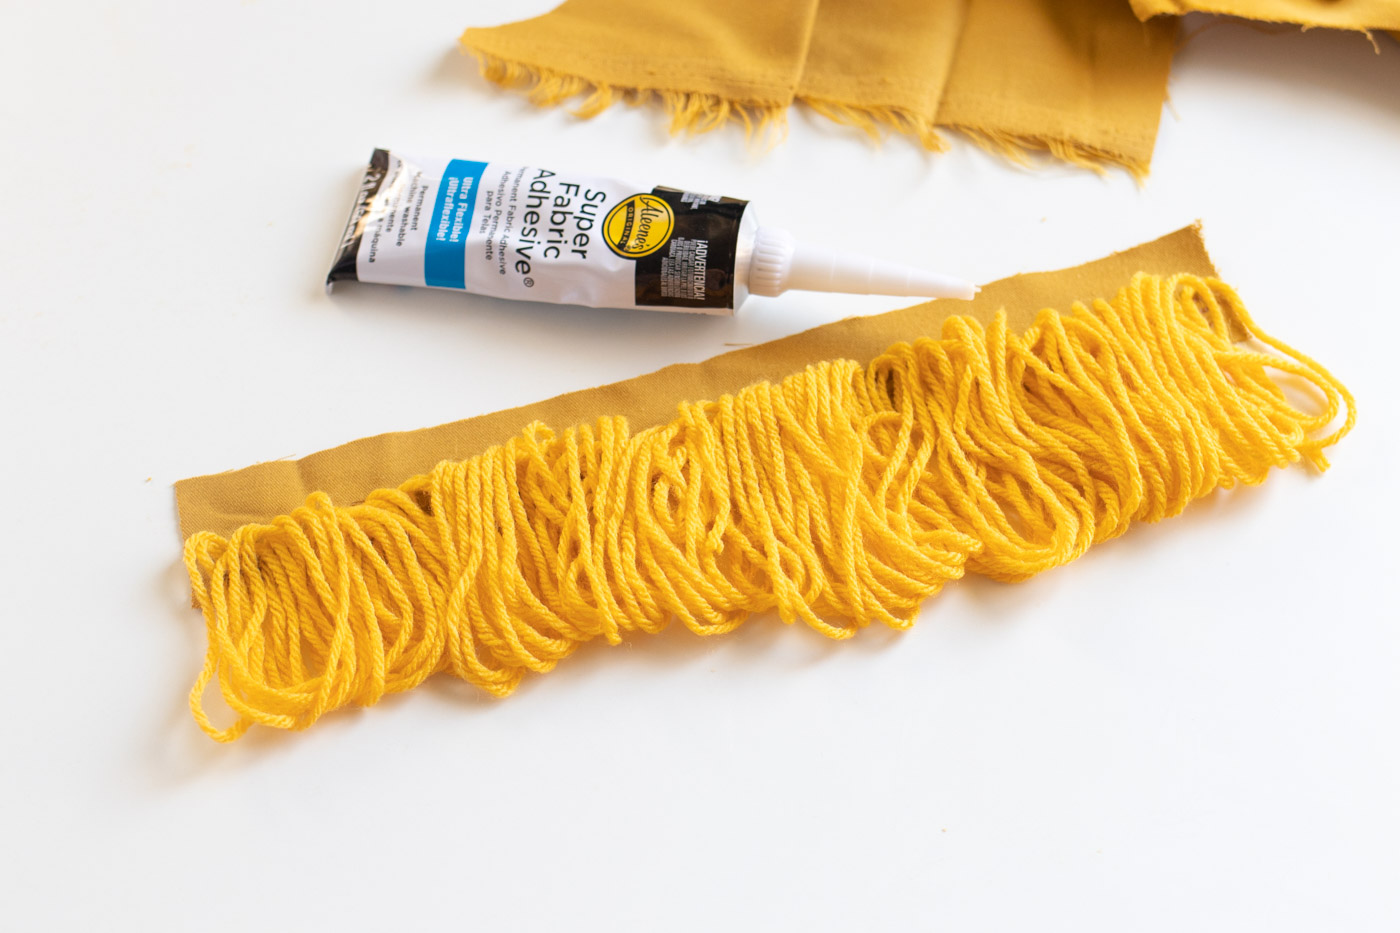 DIY No-Sew Boho Fringe Pillow /// Tutorial by Club Crafted for Design Fixation #colorful #fabric #tassels